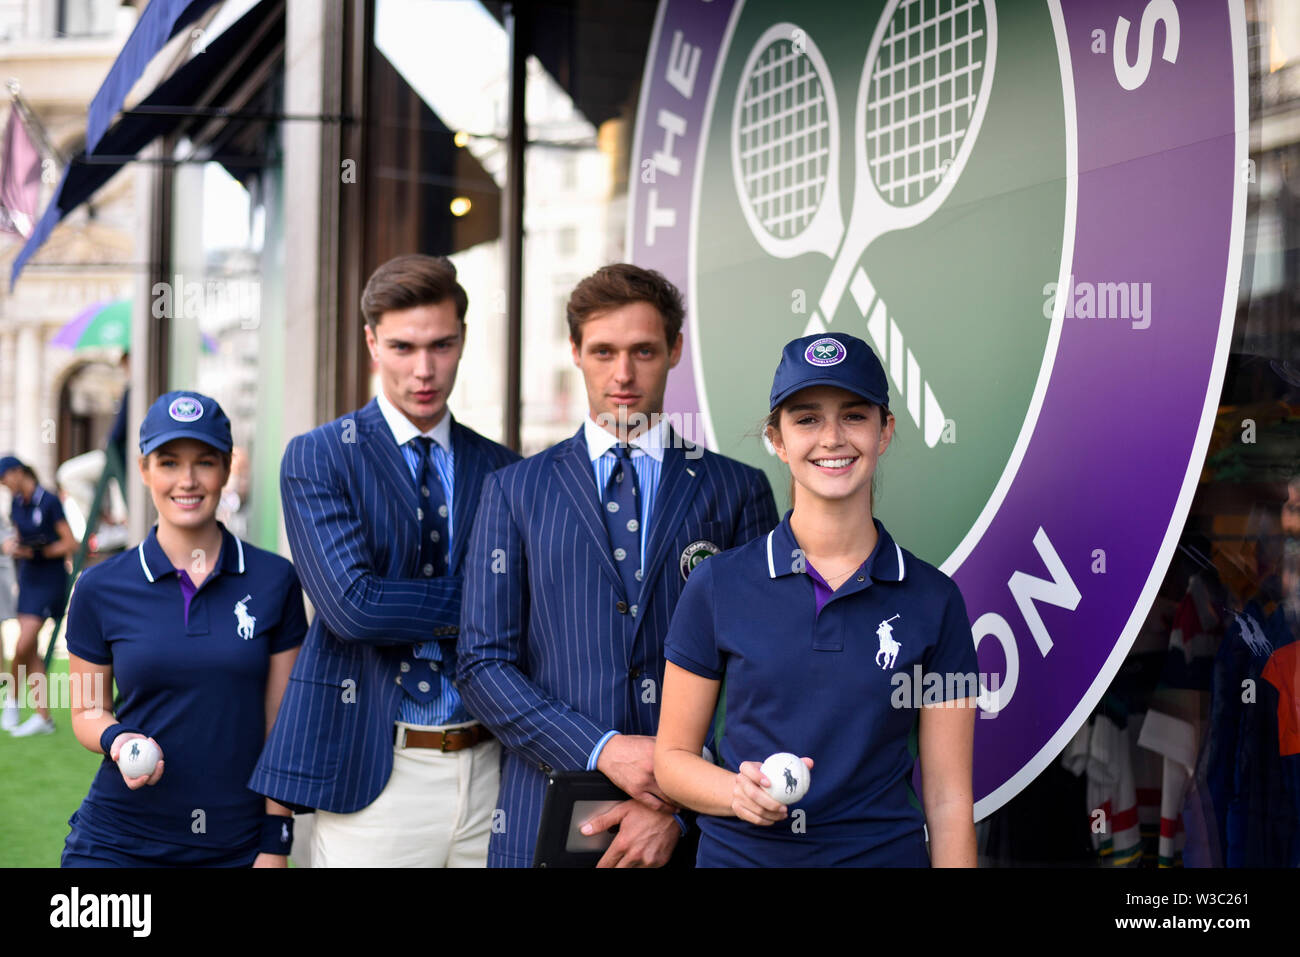 London, UK. 14 July 2019. Promotional staff dress as Wimbledon line judges  and ballgirls outside the Polo Ralph Lauren store during "Summer Streets",  an annual event in Regent Street where the street